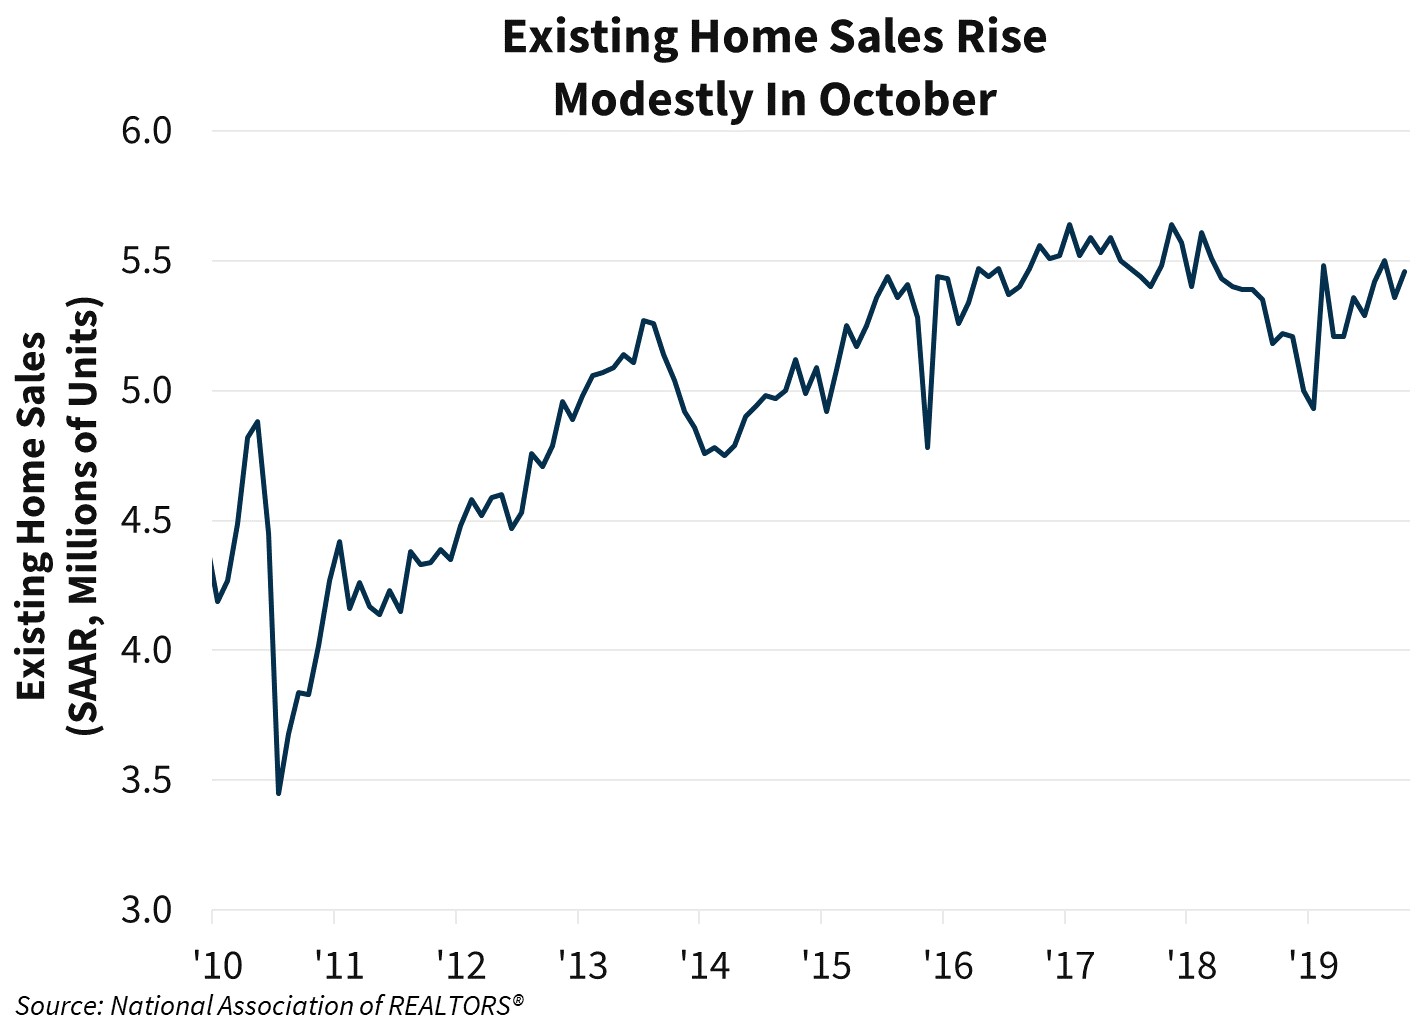 Existing Home Sales Rise Modestly in October